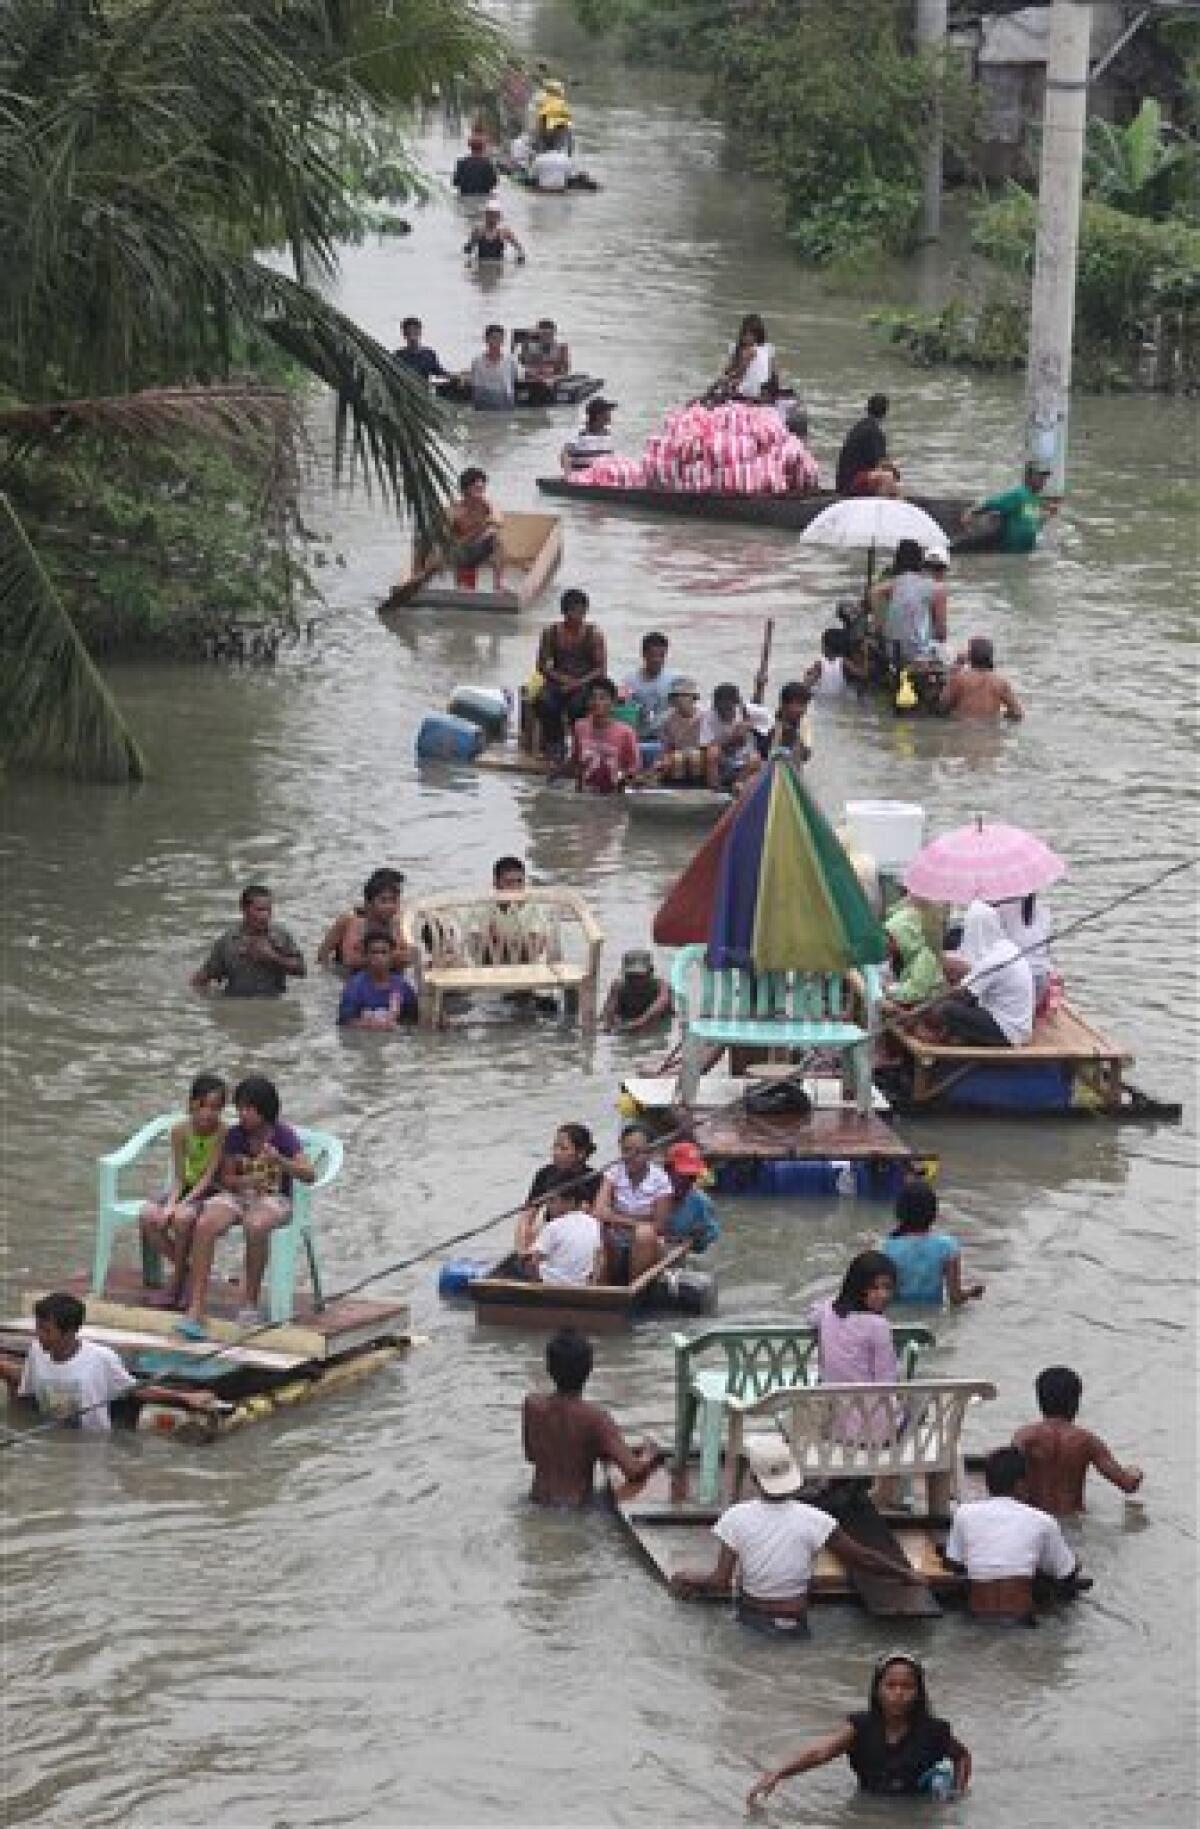 Residents go on with their normal life amidst floodwaters in Taytay township, Rizal province, east of Manila, Philippines Friday Oct. 2, 2009. Tropical storm Ketsana brought the worst flooding in metropolitan Manila and neighboring provinces in more than 40 years that left more than 250 people dead and dozens more missing. The Philippines is bracing for the super typhoon Parma which is expected to hit the northern part of the country Saturday. (AP Photo/Bullit Marquez)